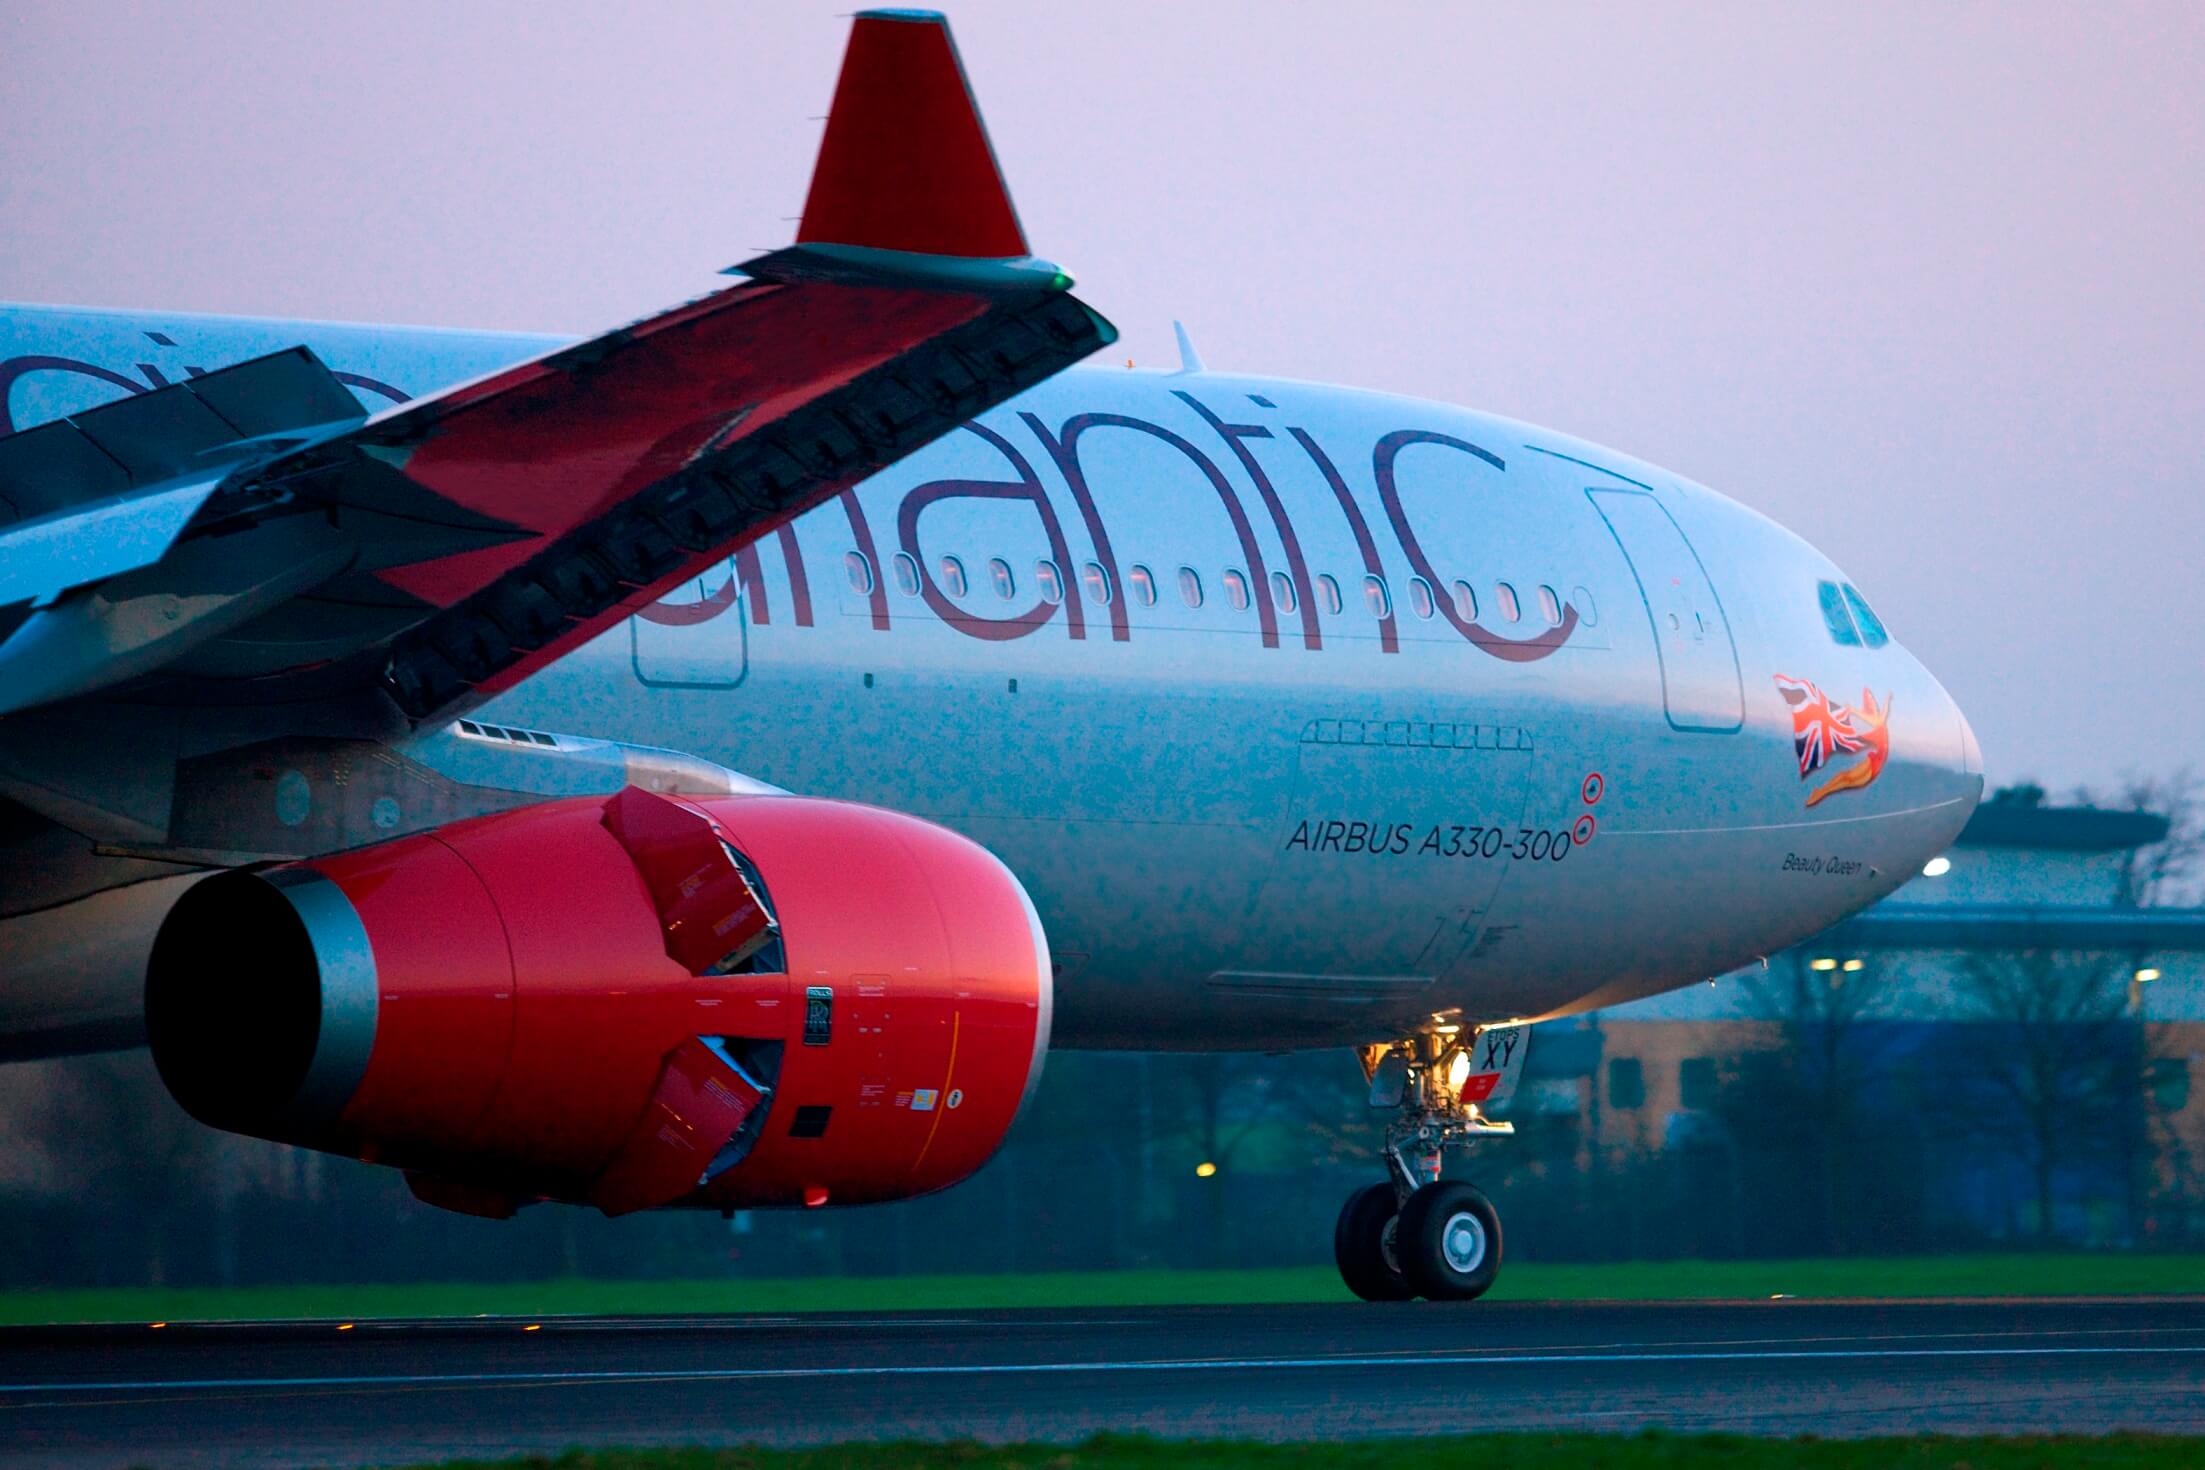 US government penalises Virgin Atlantic for flying over Iraq